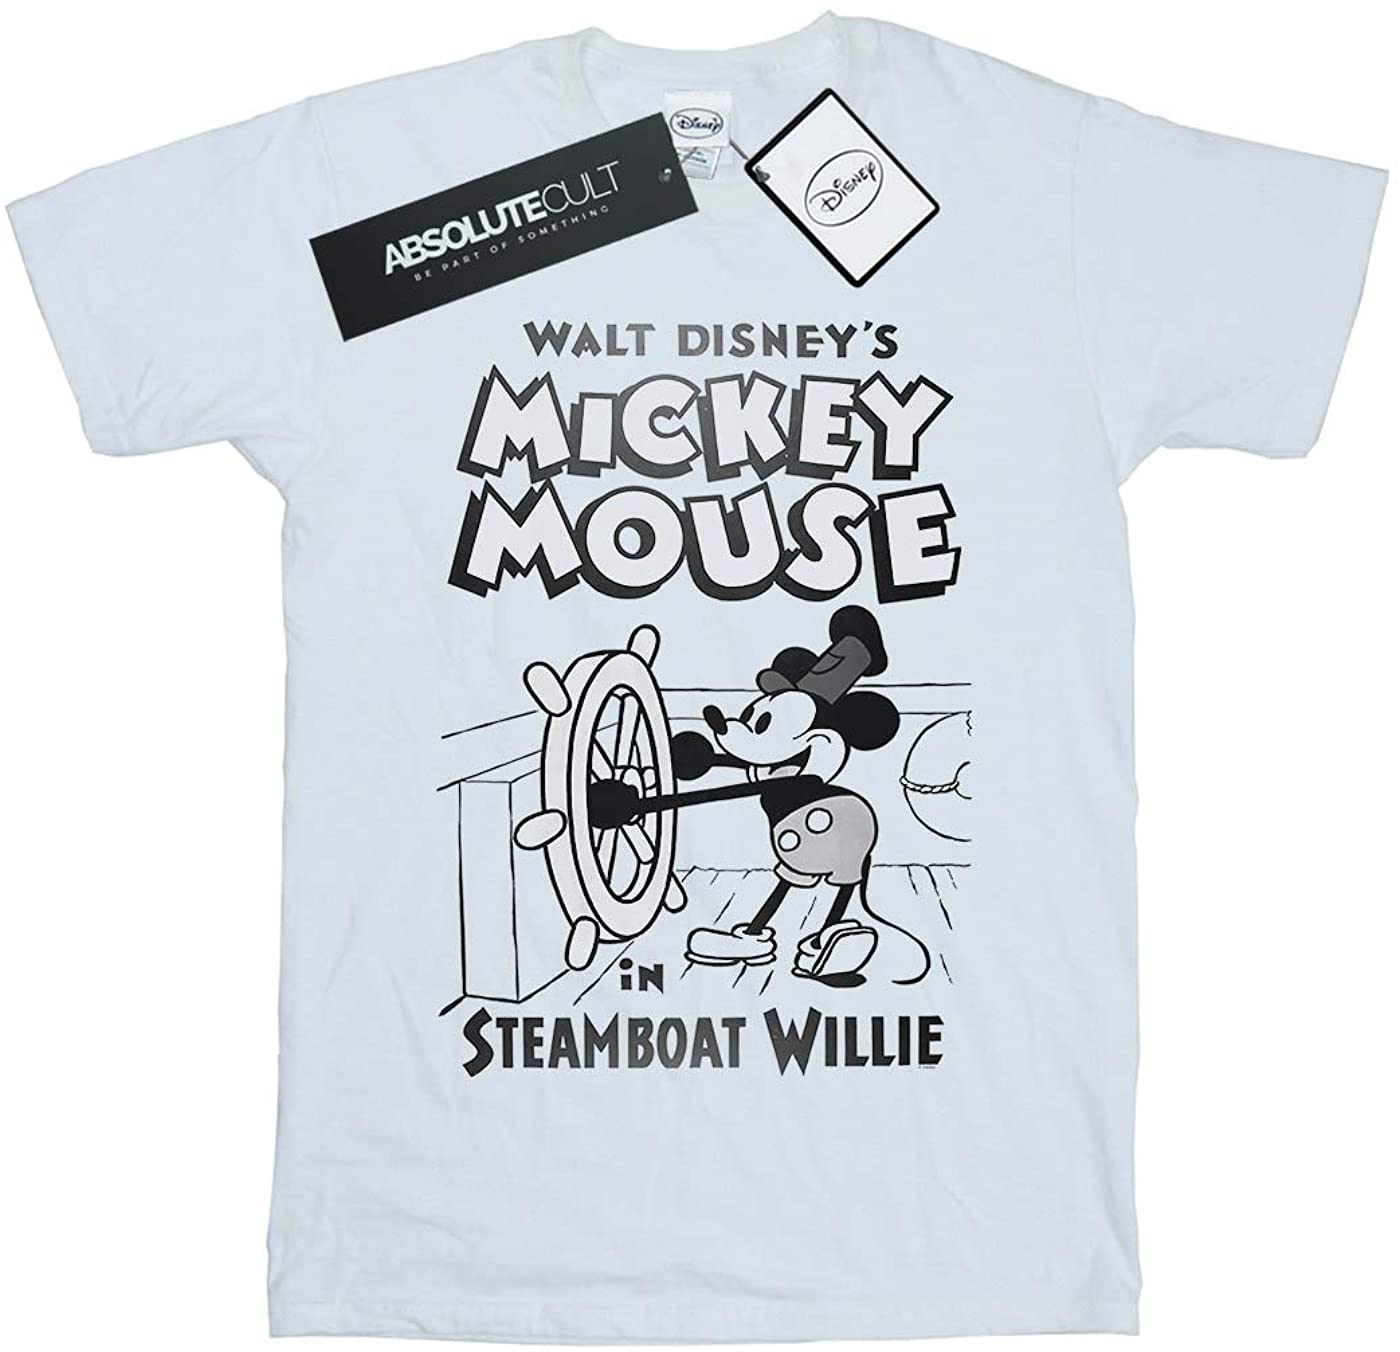 conspiracy theories  - steamboat willie shirt - Dat Disney Absolutecult Be Part Of Something Walt Disney'S Mickey Mouse iN Steamboat Willie